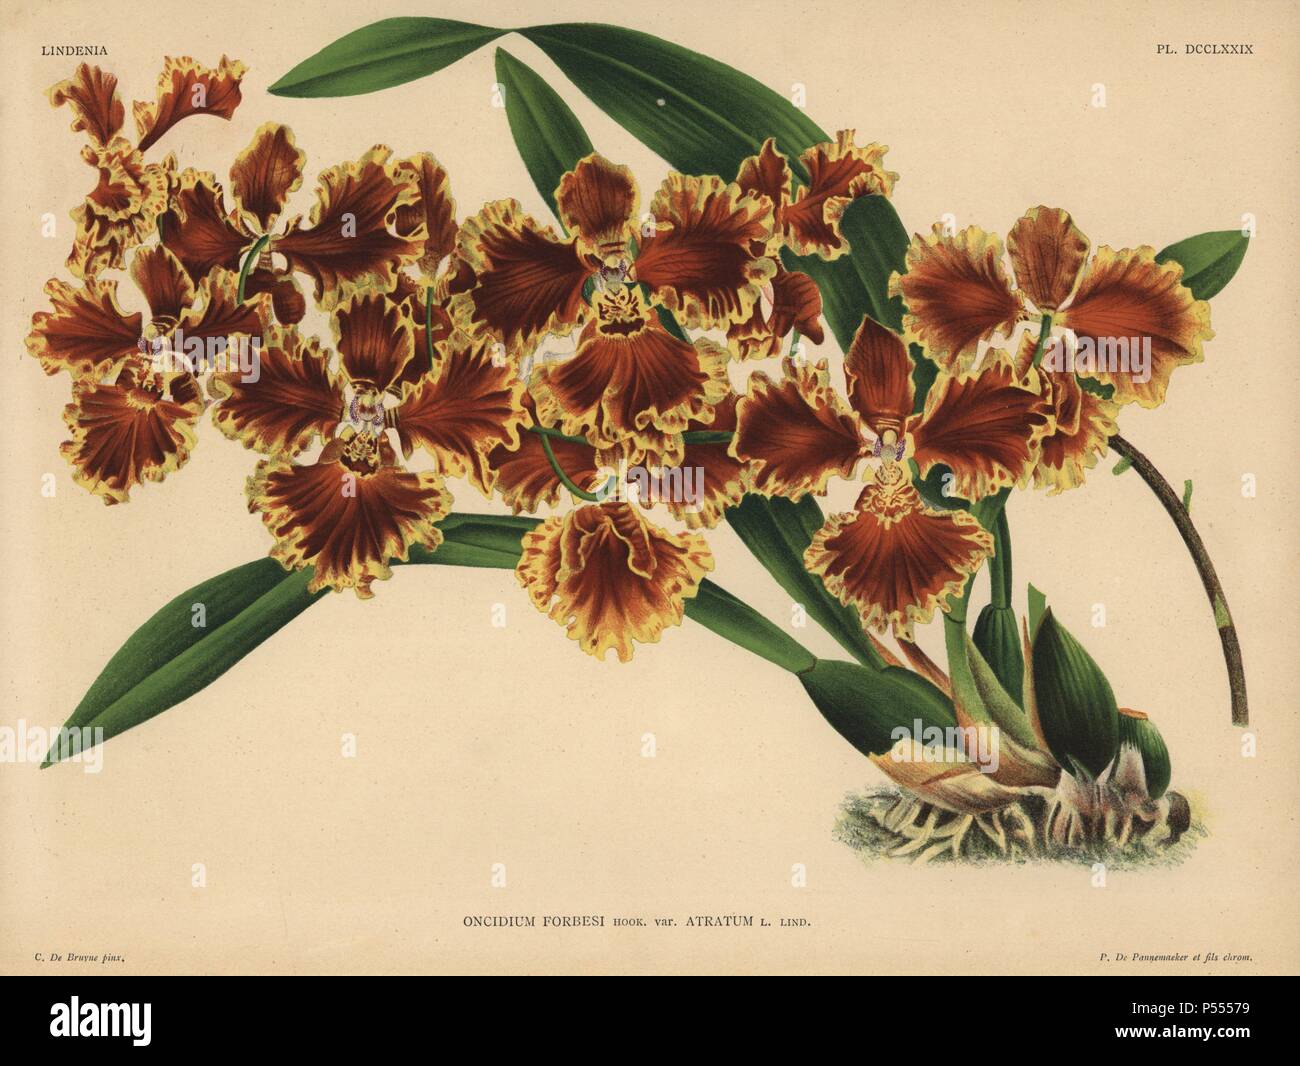 Reverend Forbes' Oncidium, Hook. var. Atratum. Illustration drawn by C. de Bruyne and chromolithographed by P. de Pannemaeker et fils from Lucien Linden's 'Lindenia, Iconographie des Orchidees,' Brussels, 1902. Stock Photo